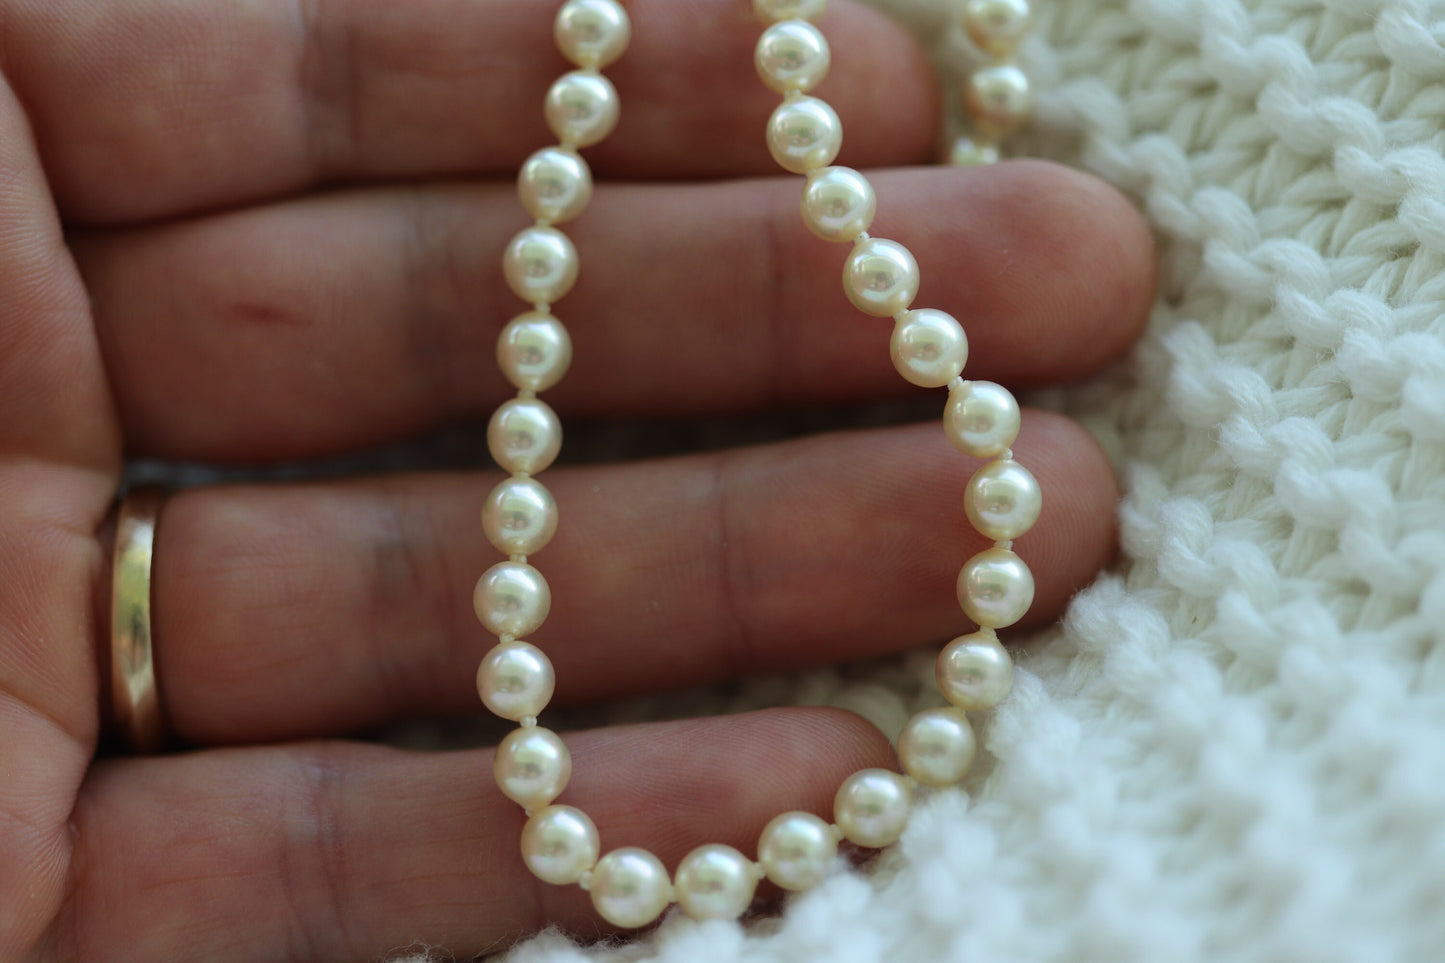 18k Akoya Pearl Necklace. High Quality Designer 18in length 5.5mm AKOYA pearls with warm hue. 18k PMS Designer Pearls necklace. st(115)